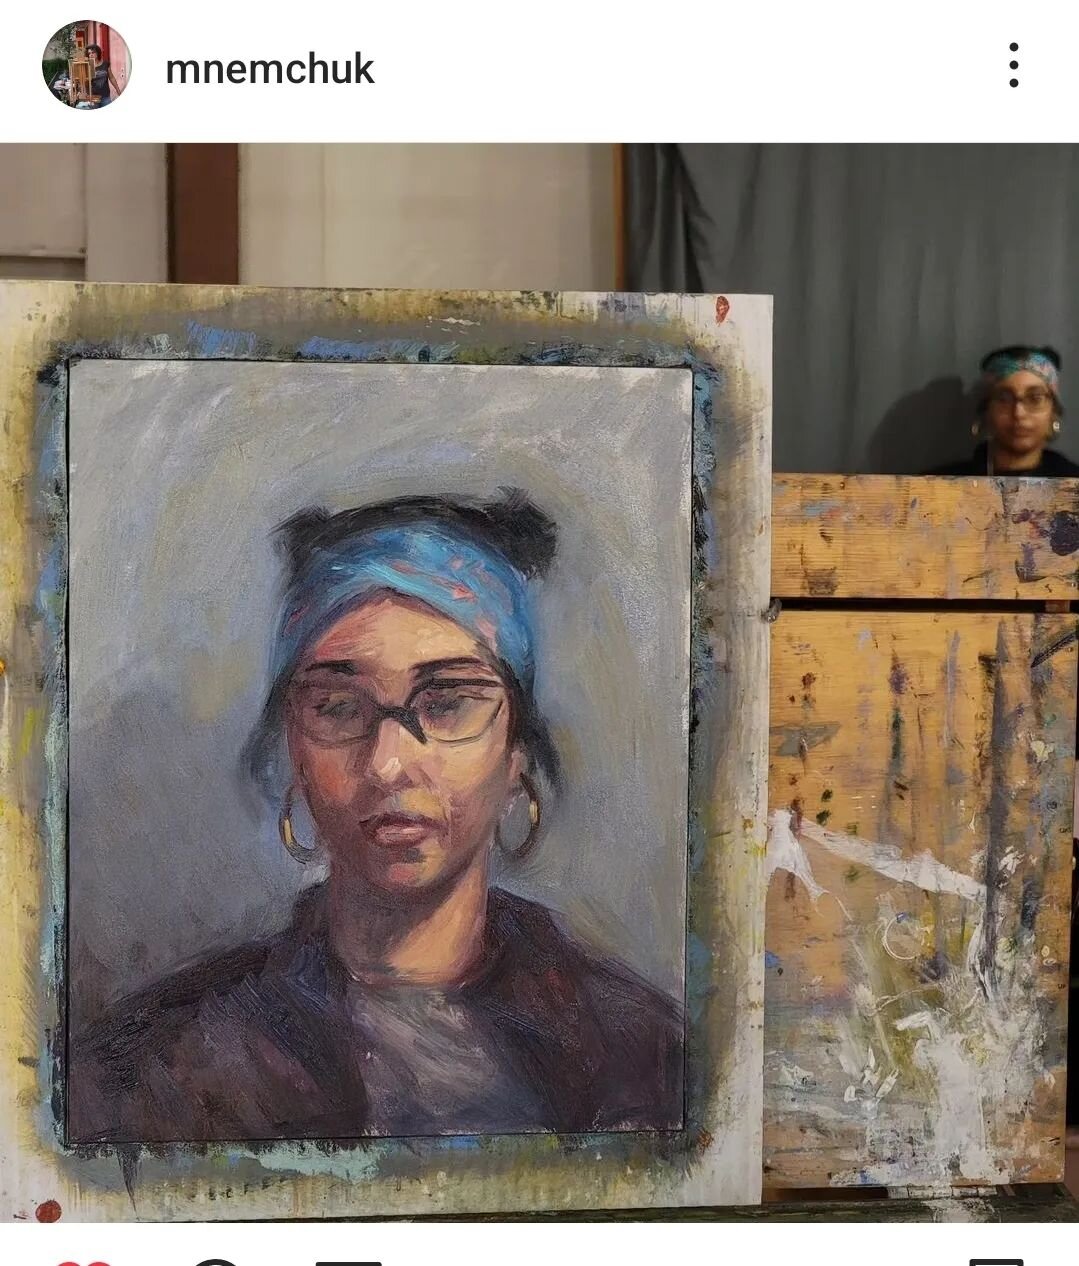 Beautiful work by @mnemchuk from yesterday's Saturday Artist Workshop!

Join us at the First Church on Bradford Common the 2nd and 4th Saturday morning of each month for a drop-in workshop featuring a live portrait model and still life set up. More i